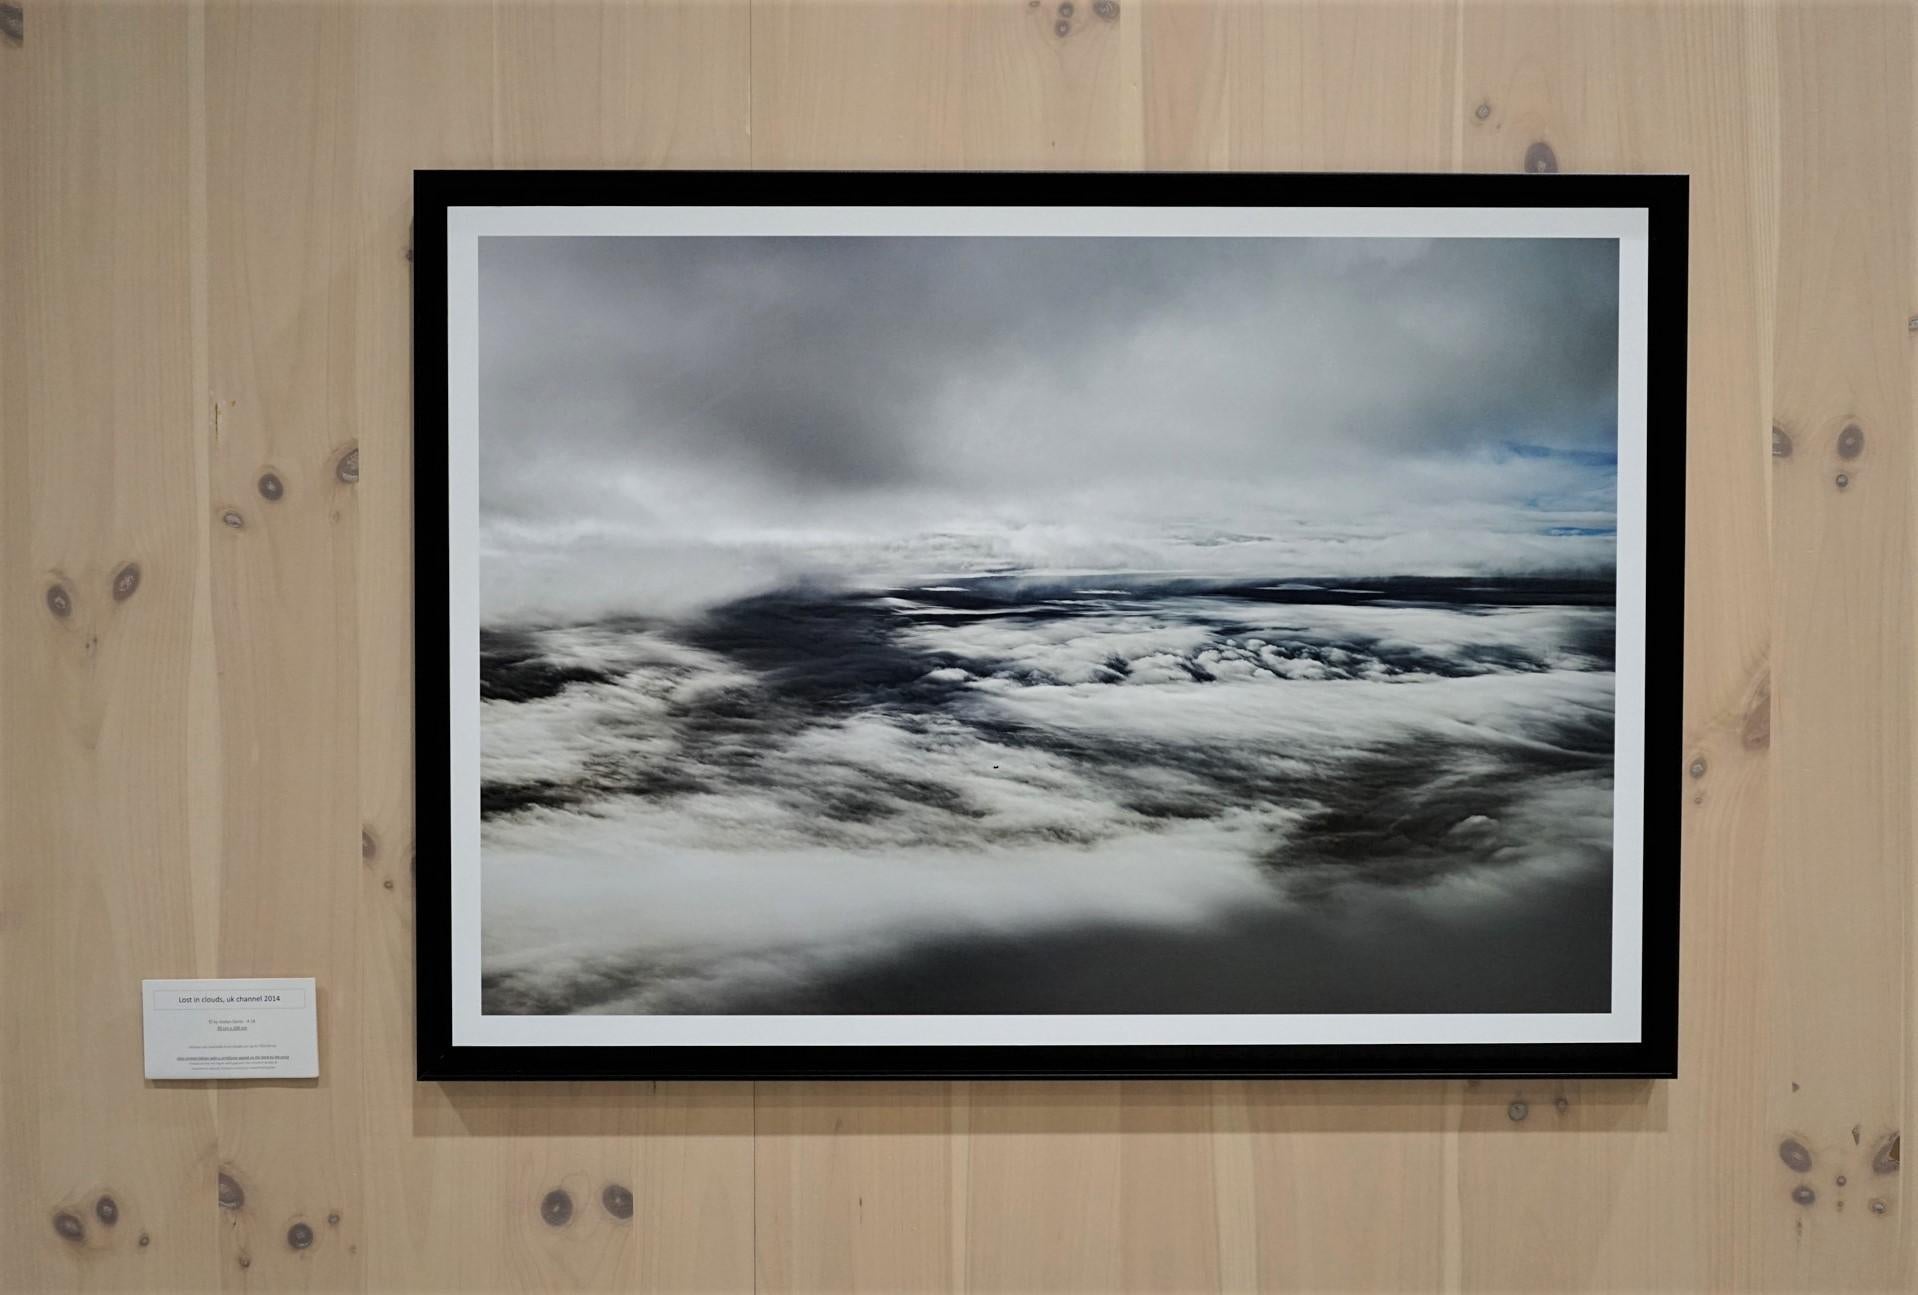 Lost in clouds, UK channel 2014 - # 1 / 7 Limited Edition Fine Art Photography - Gray Landscape Photograph by Stefan Darte